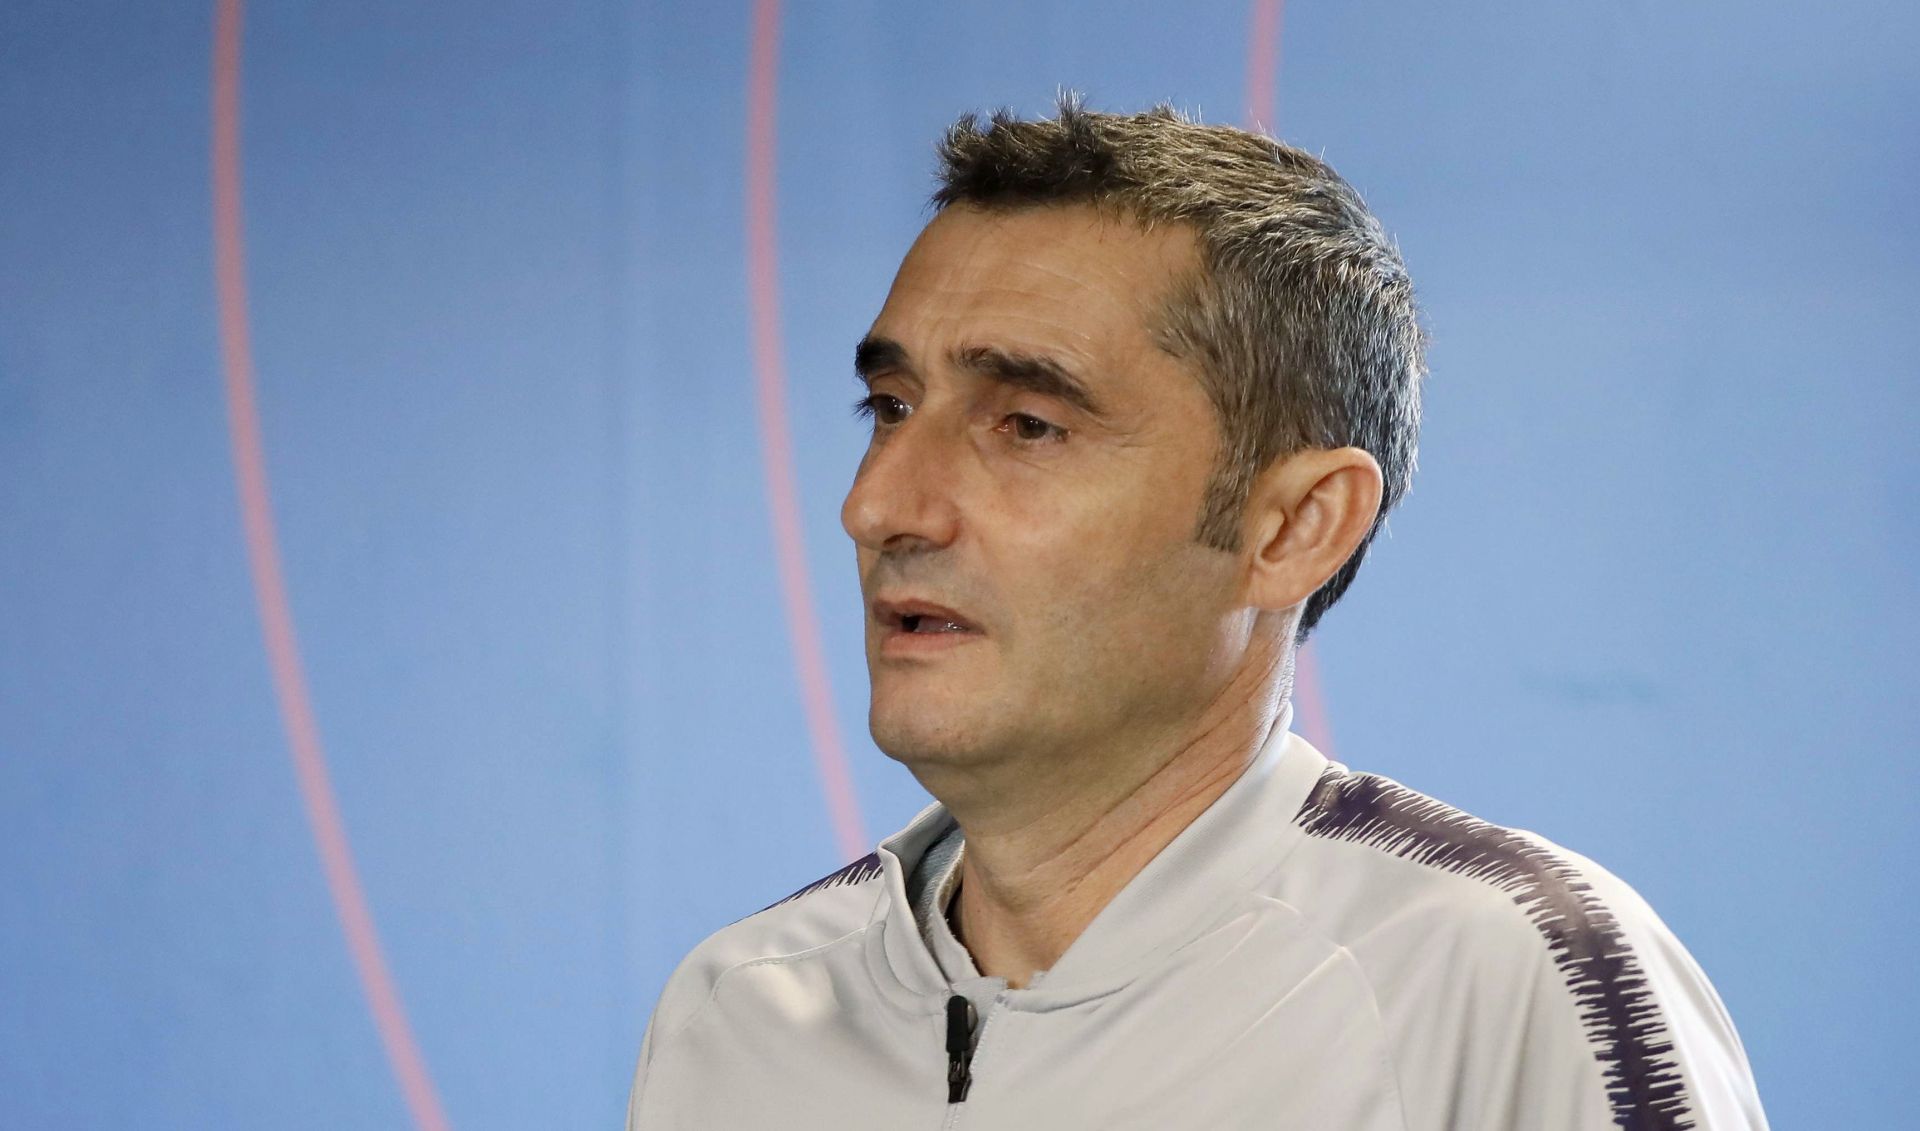 epa07321488 Barcelona's FC head coach, Ernesto Valverde, addresses a press conference after the team's training session at Joan Gamper sports city in Barcelona, Spain, 26 January 2019. Barcelona FC faces Girona, 27 January 2019, in a Primera Division Liga match.  EPA/Andreu Dalmau